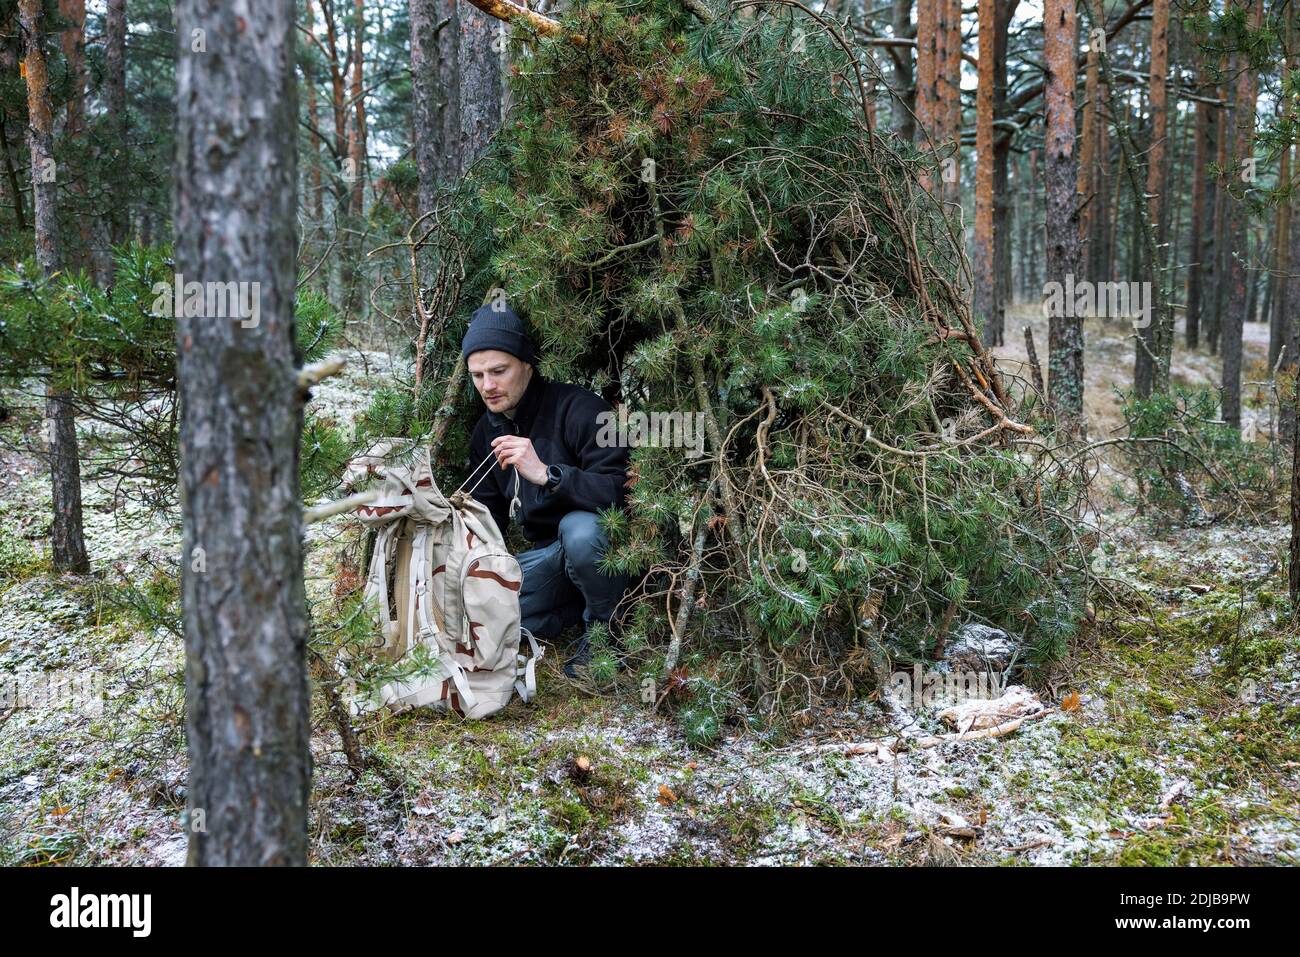 outdoor adventure - man in tree branch shelter into the wild Stock Photo